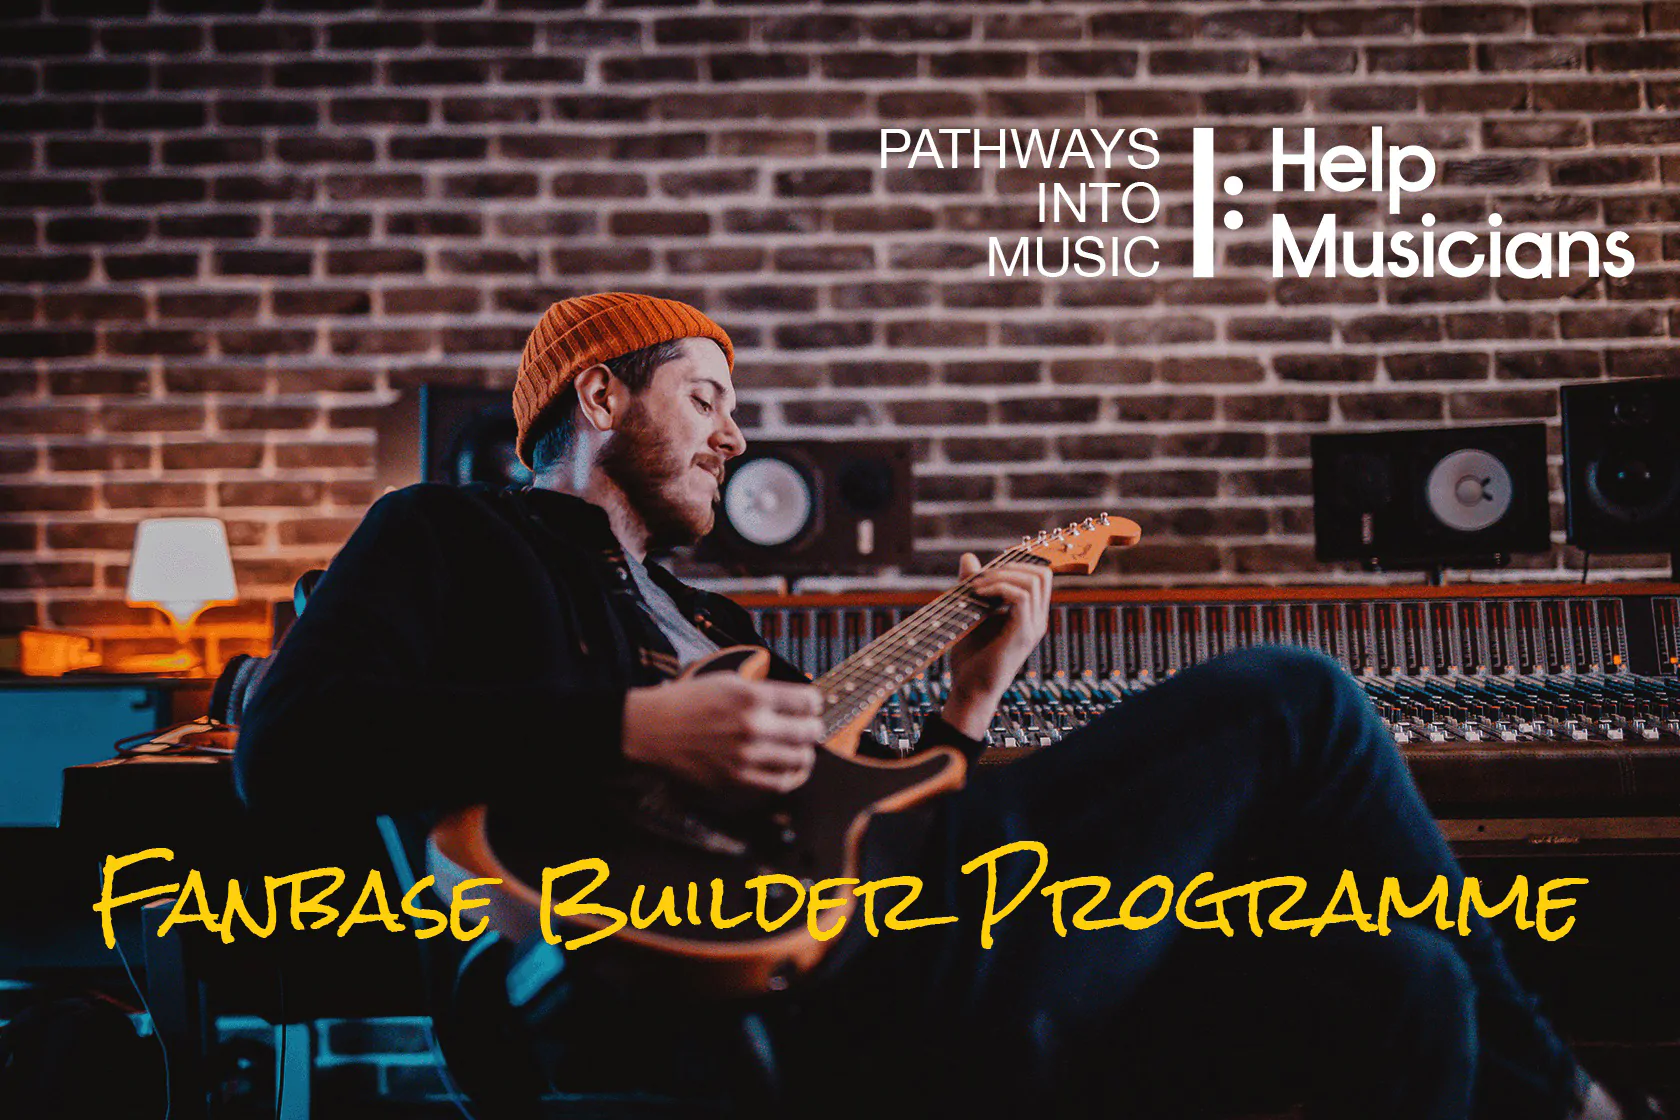 Take your music career to the next level and grow your fanbase with the Fanbase Builder Programme from CMU’s Pathways Into Music Foundation and Help Musicians